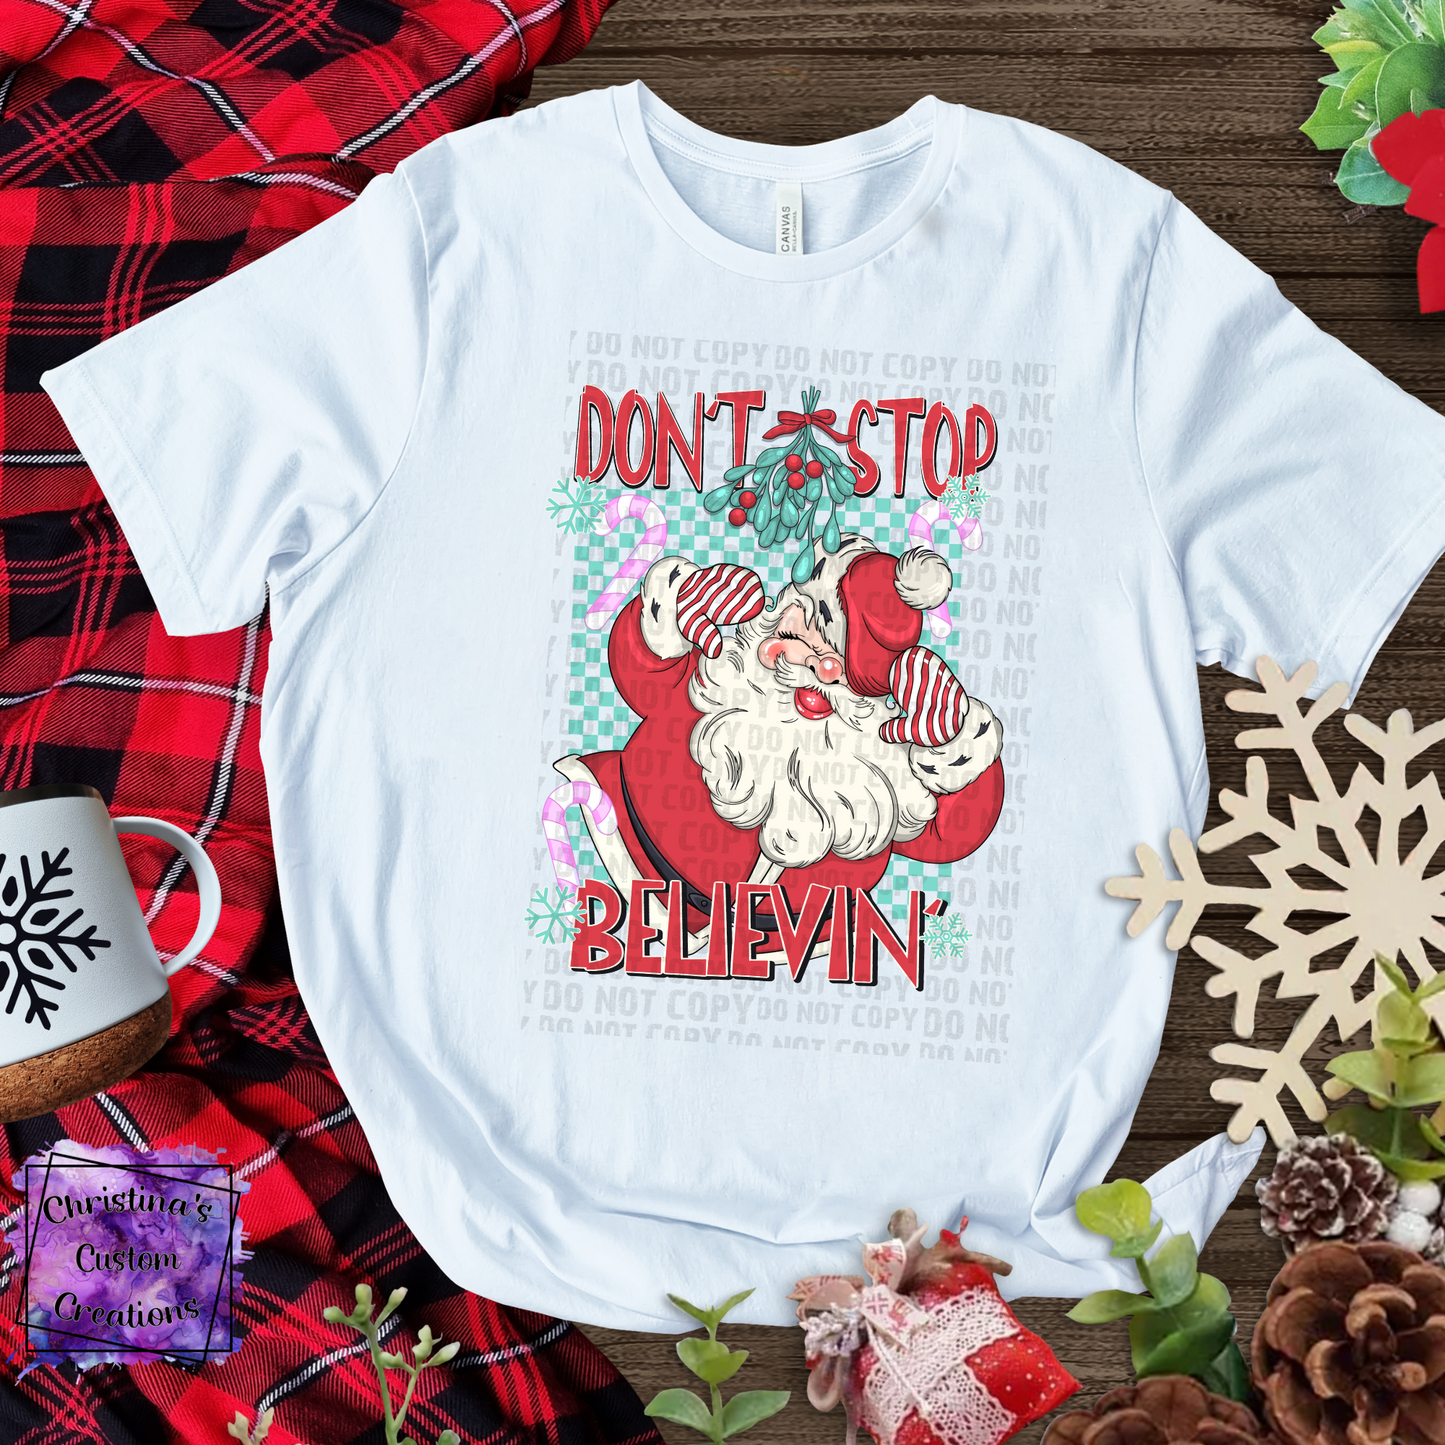 Don't Stop Believin' T-Shirt | Cute Christmas Shirt | Fast Shipping | Super Soft Shirts for Women/Kid's